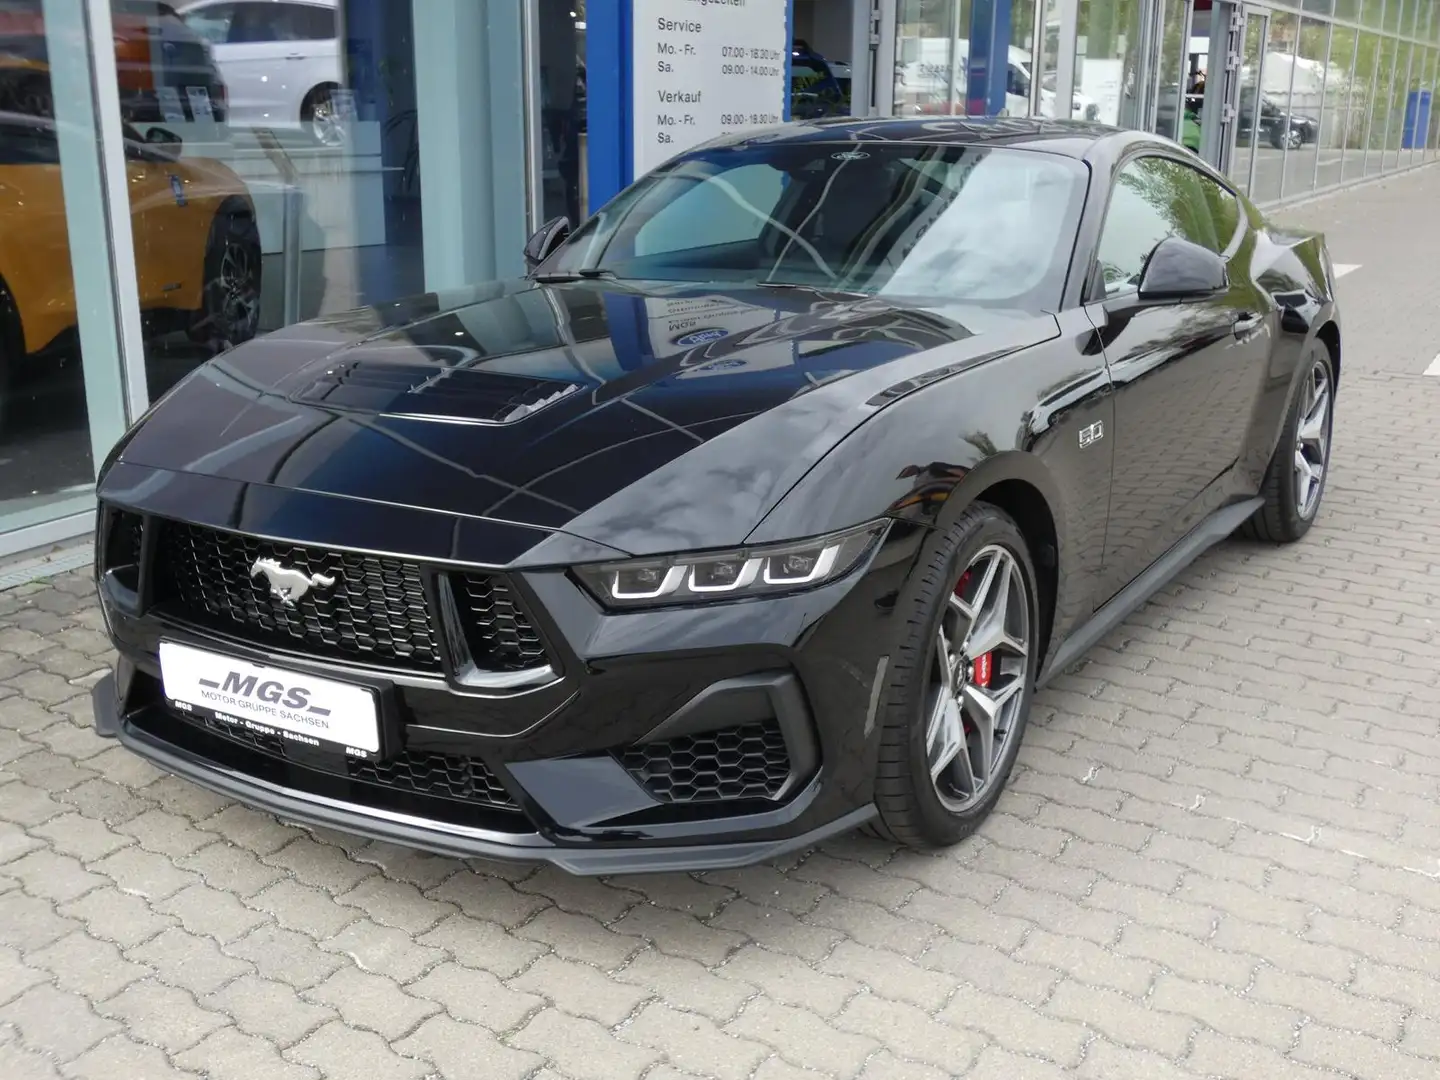 Ford Mustang 5.0 #V8 #NEUES MODELL #LED #NAVI #KLAPPE crna - 1